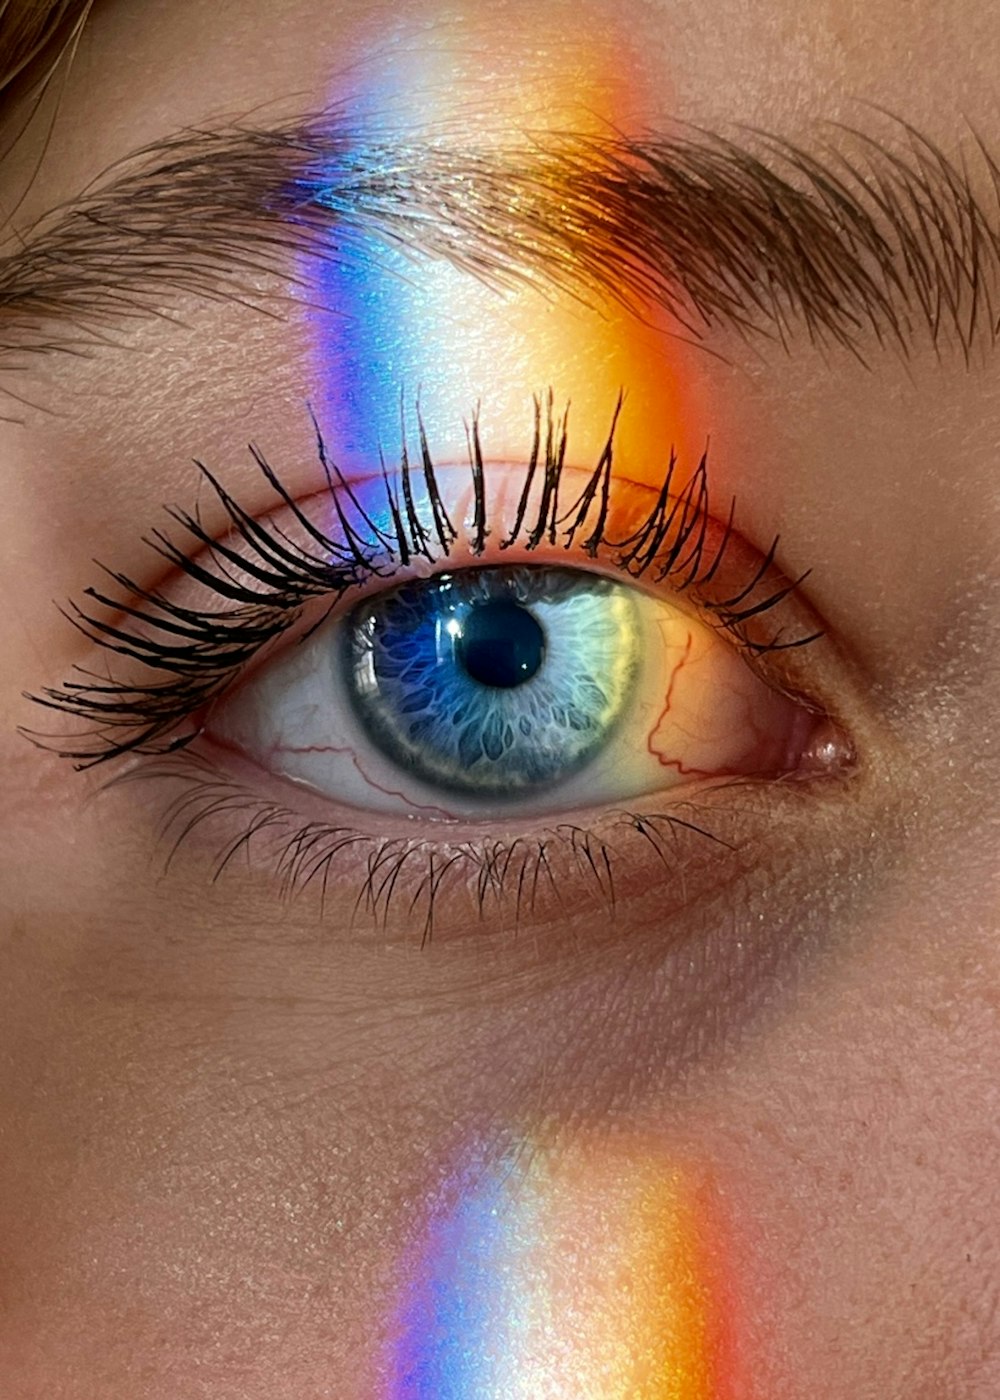 a woman's eye with a rainbow painted on it